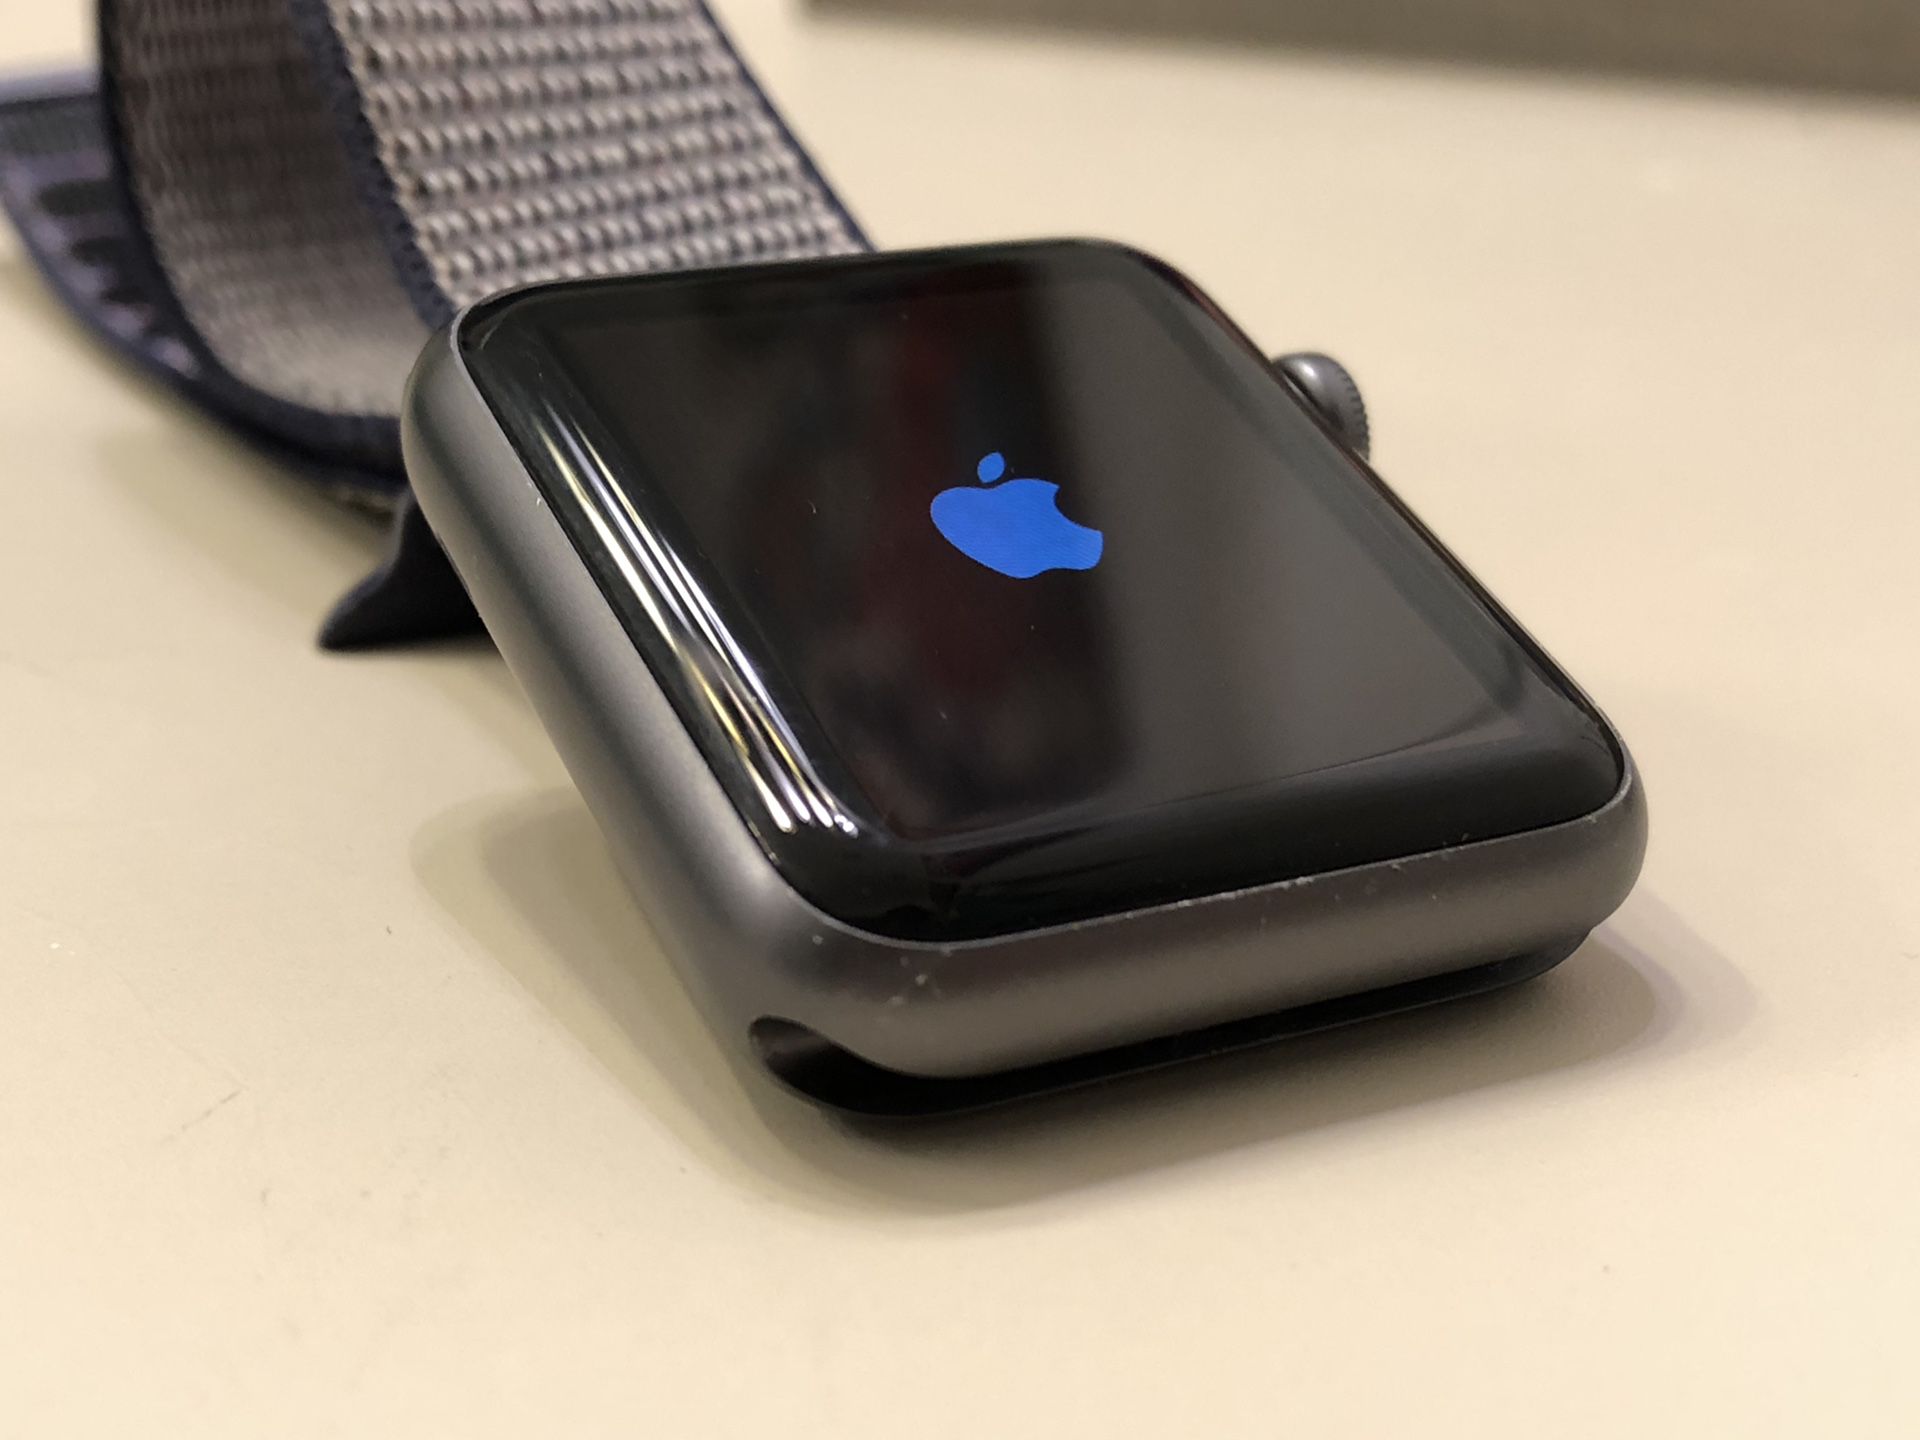 Apple Watch 42mm - Great shape, works perfectly